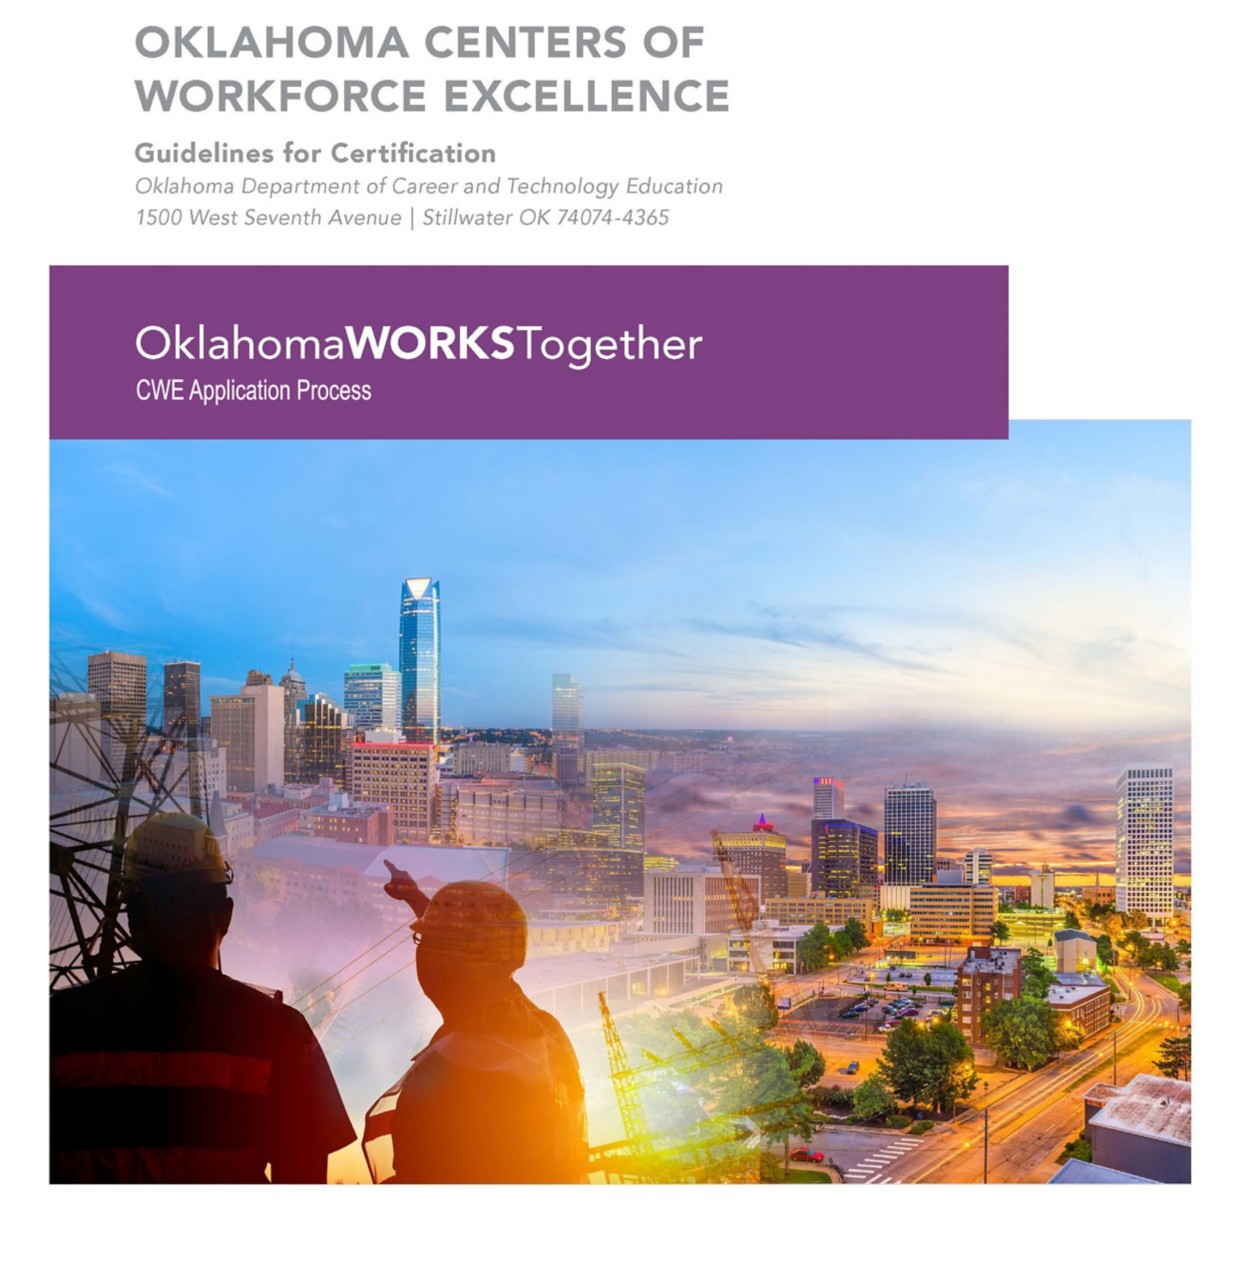 The cover photo for the application guide for the Centers of Workforce Excellence